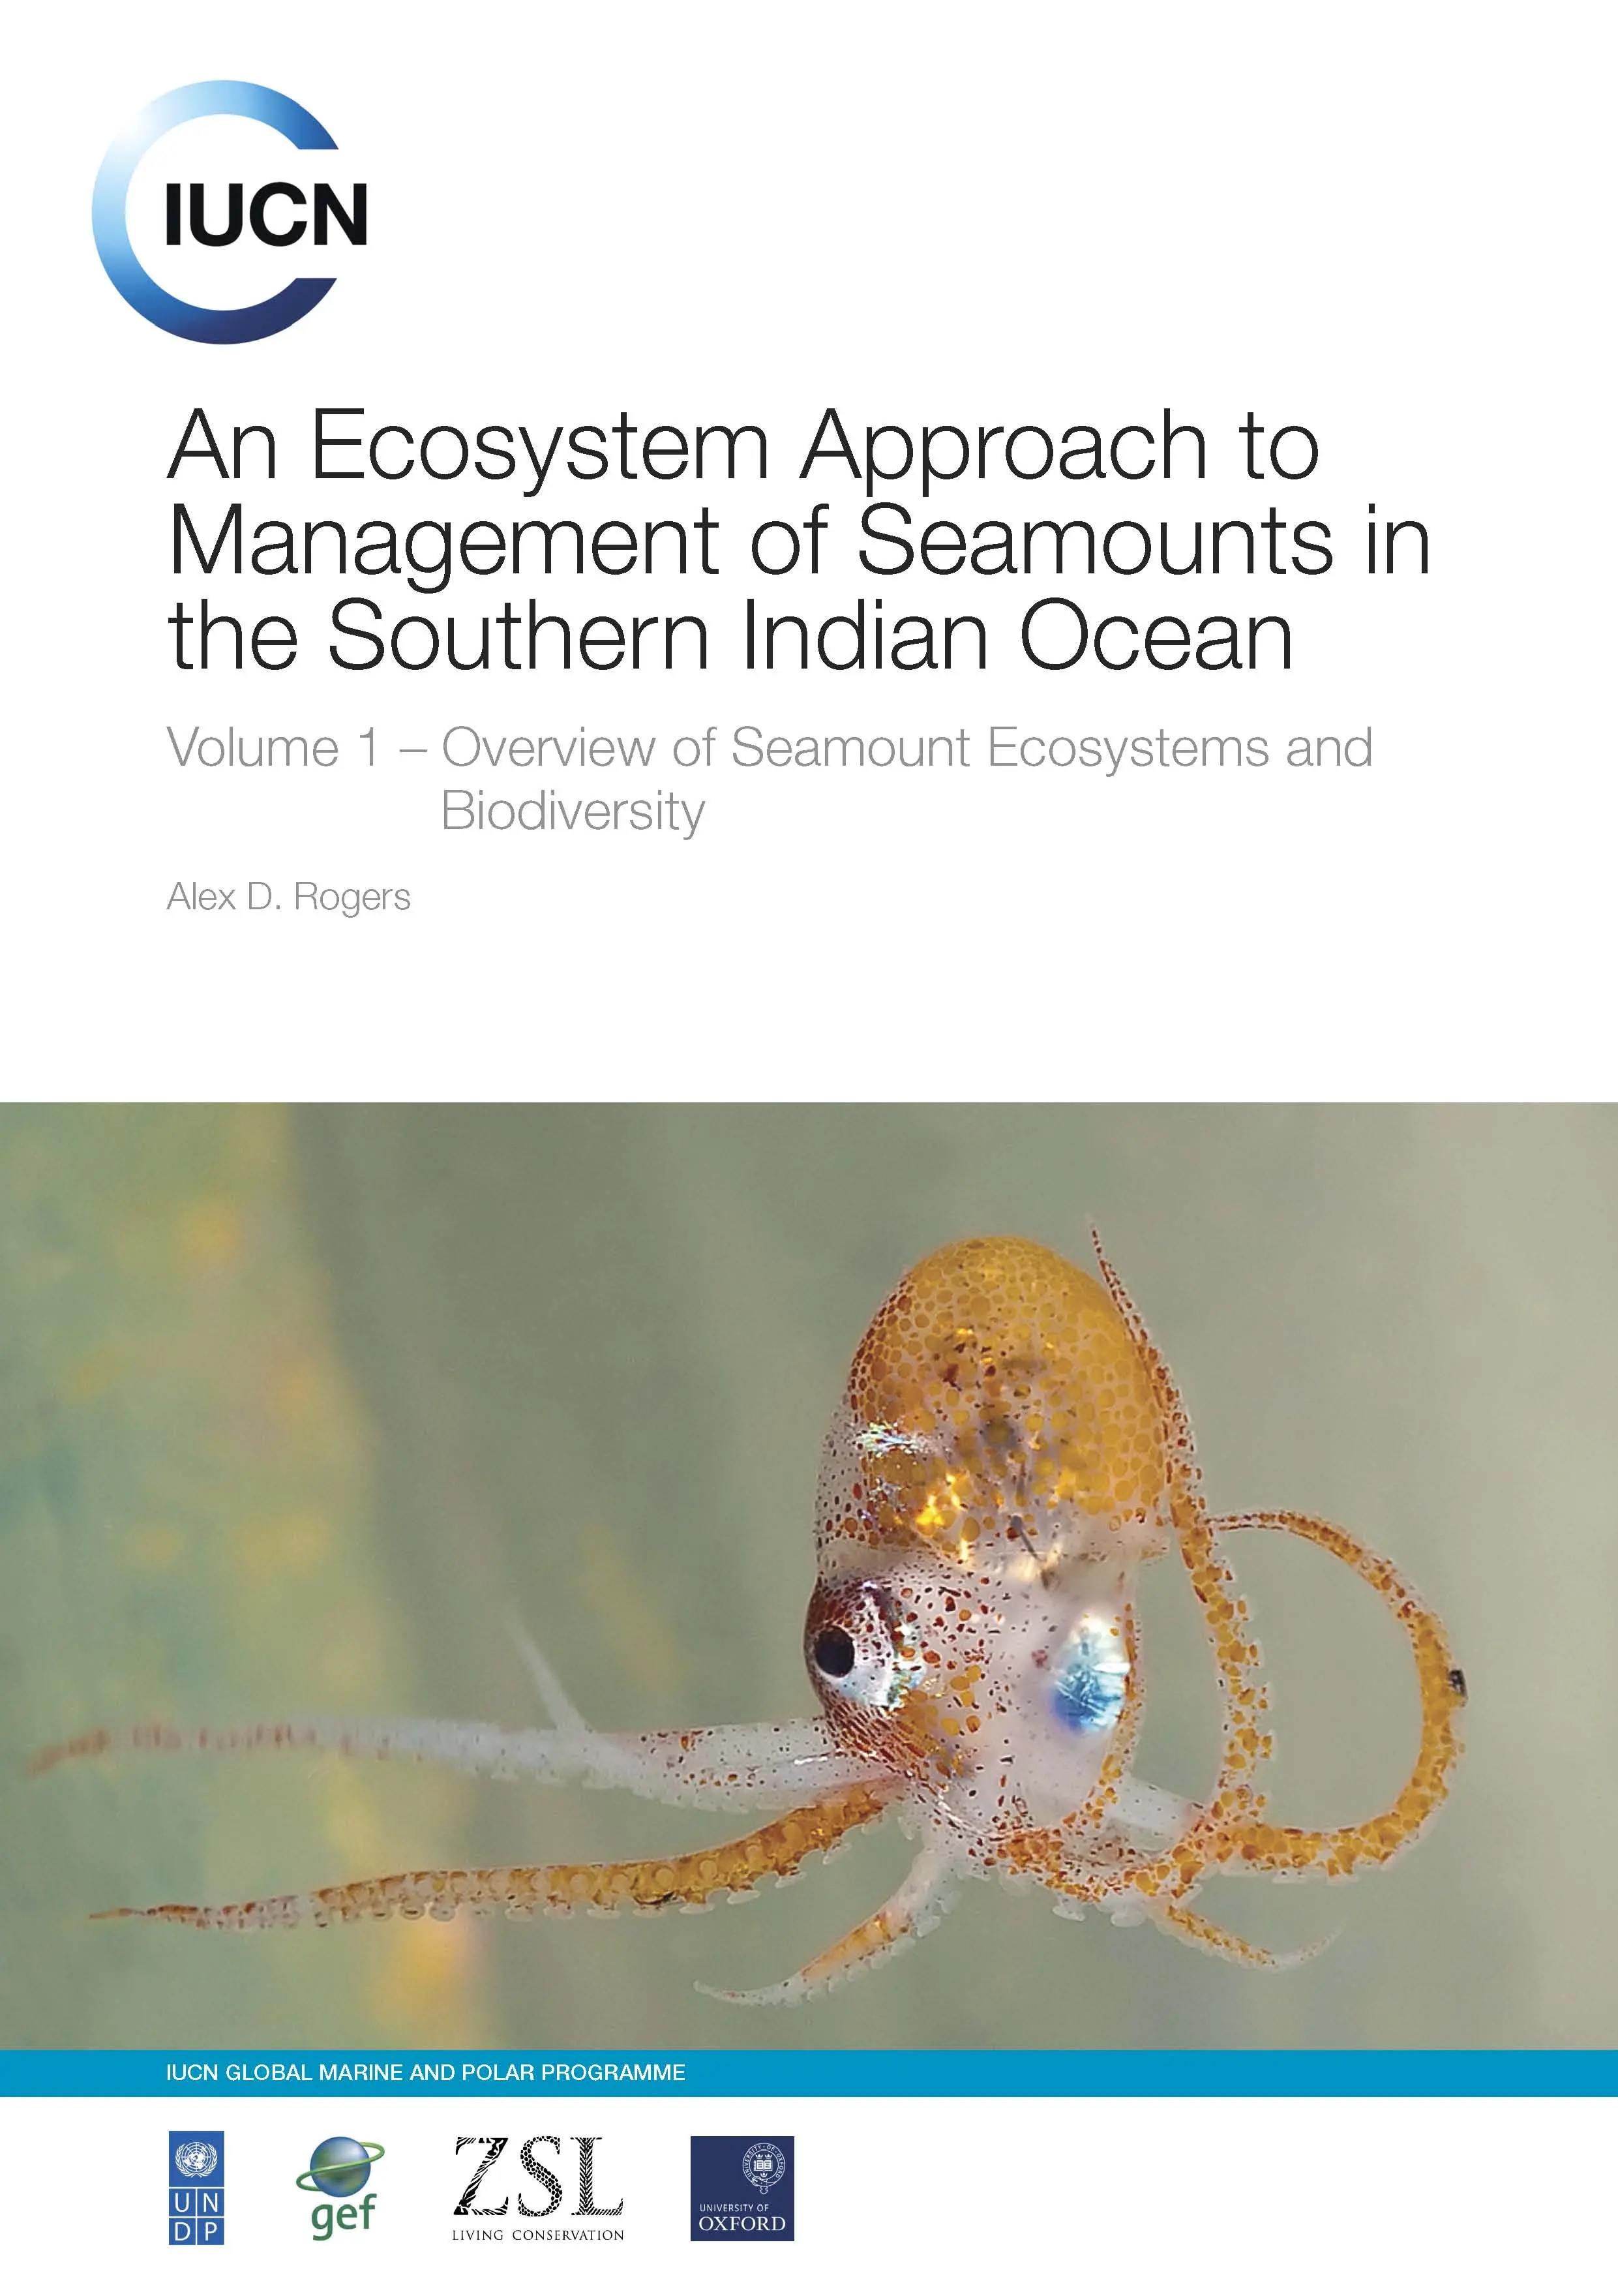 An ecosystem approach to management of seamounts in the southern Indian Ocean